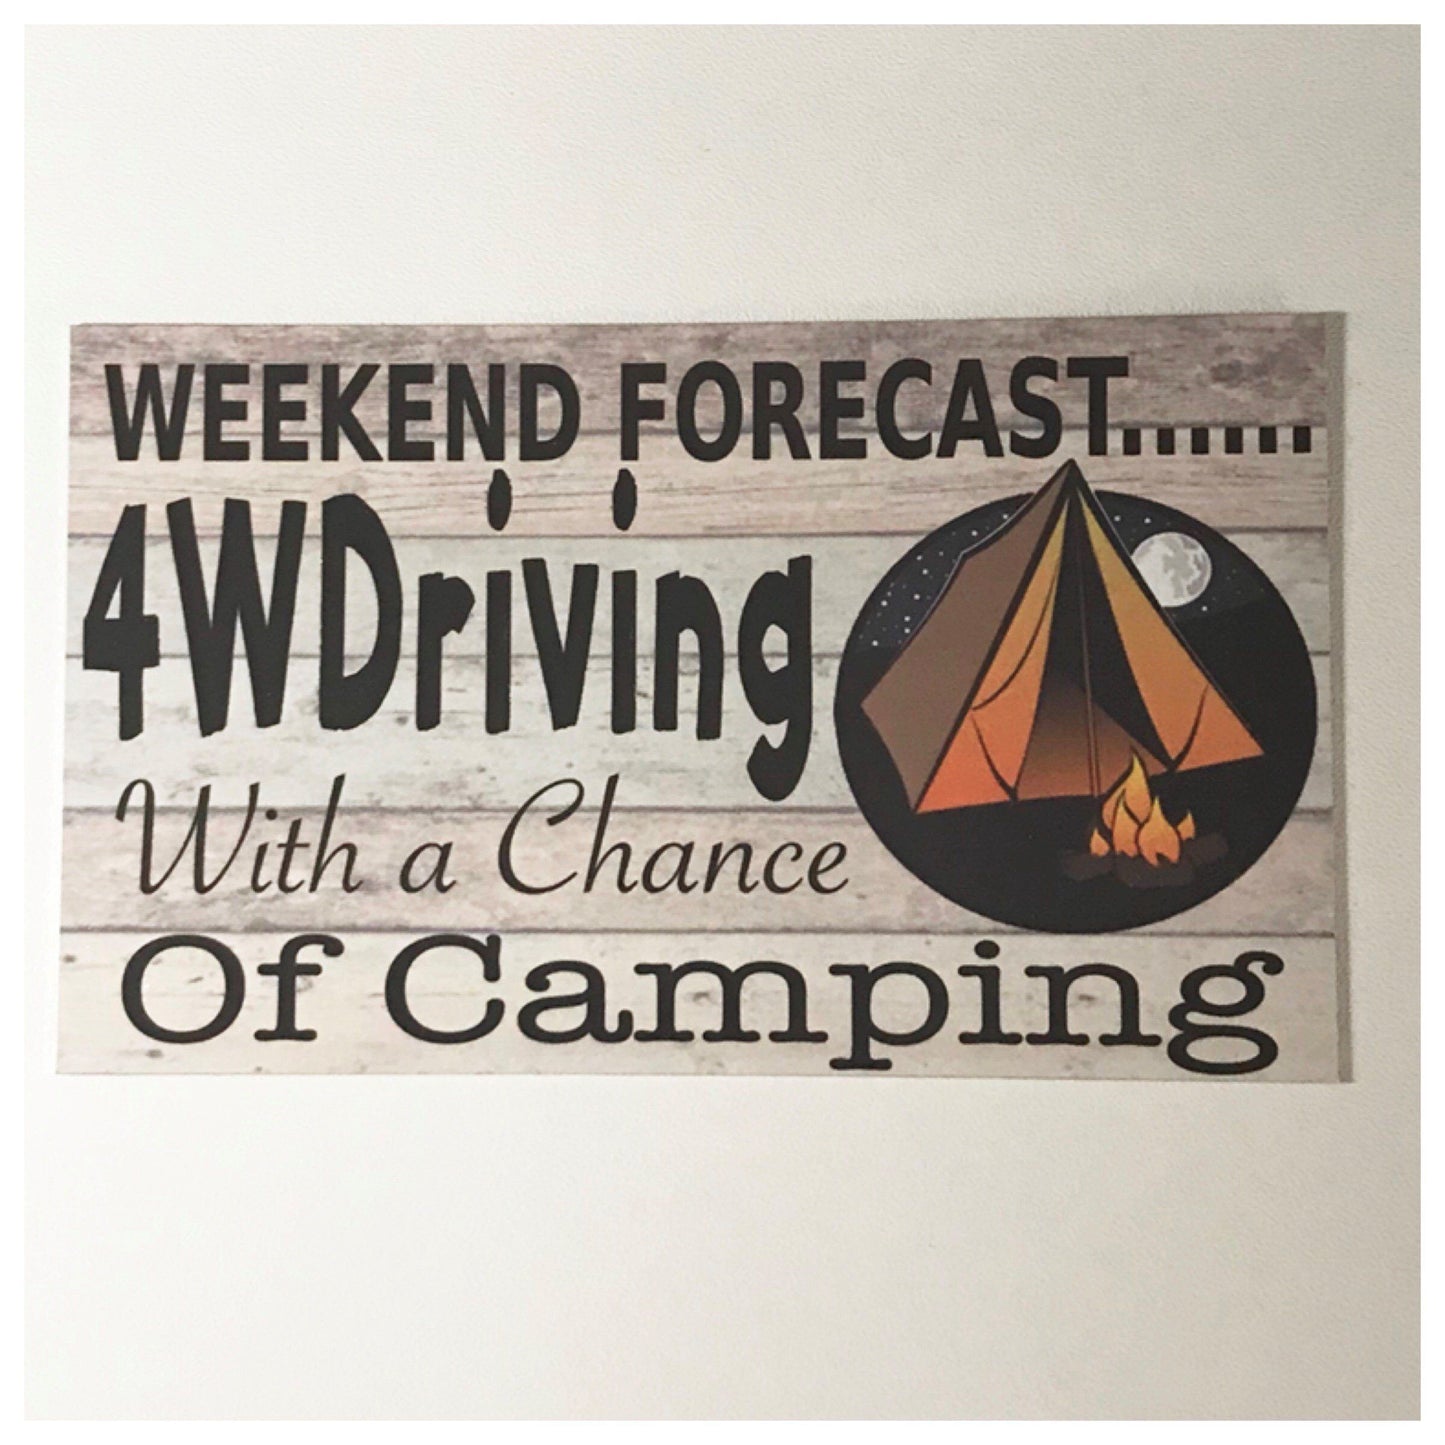 Weekend Forecast 4WDriving 4WD Camping Sign